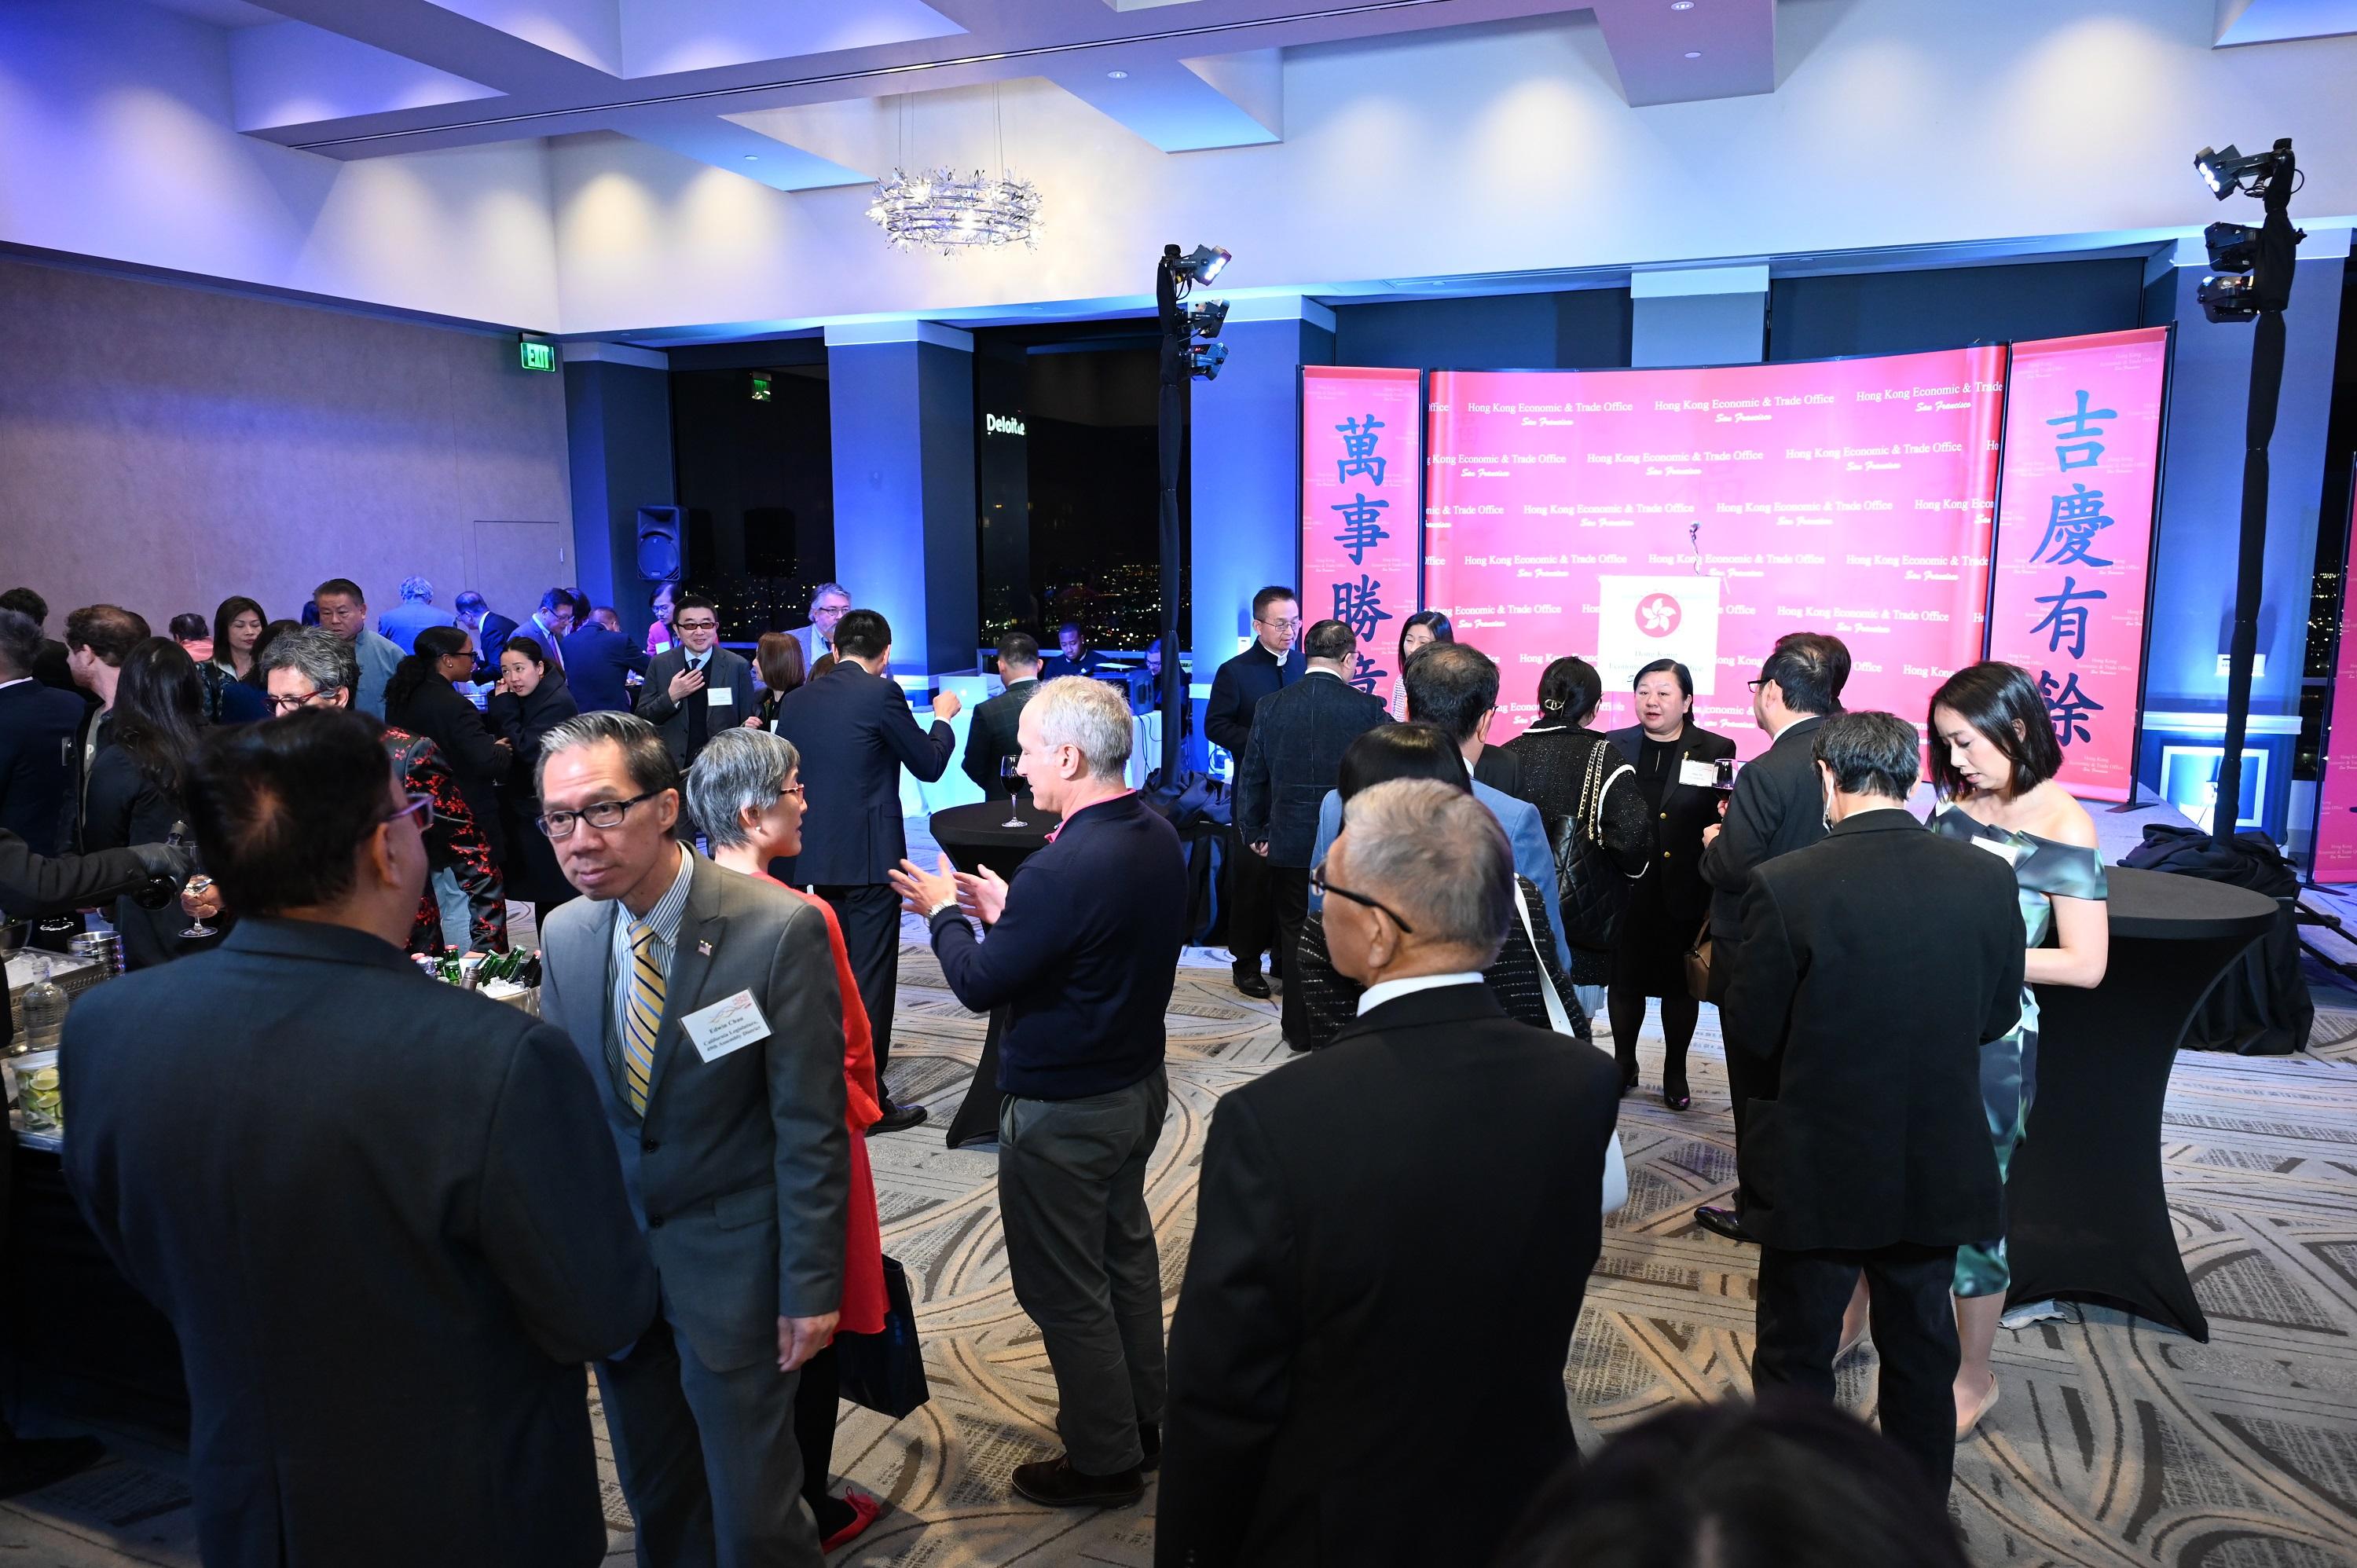 Nearly 600 guests in California, Washington and Texas, including consulate general representatives, local officials and members of academia and business as well as community leaders, attended the spring receptions hosted by the Hong Kong Economic and Trade Office in San Francisco.